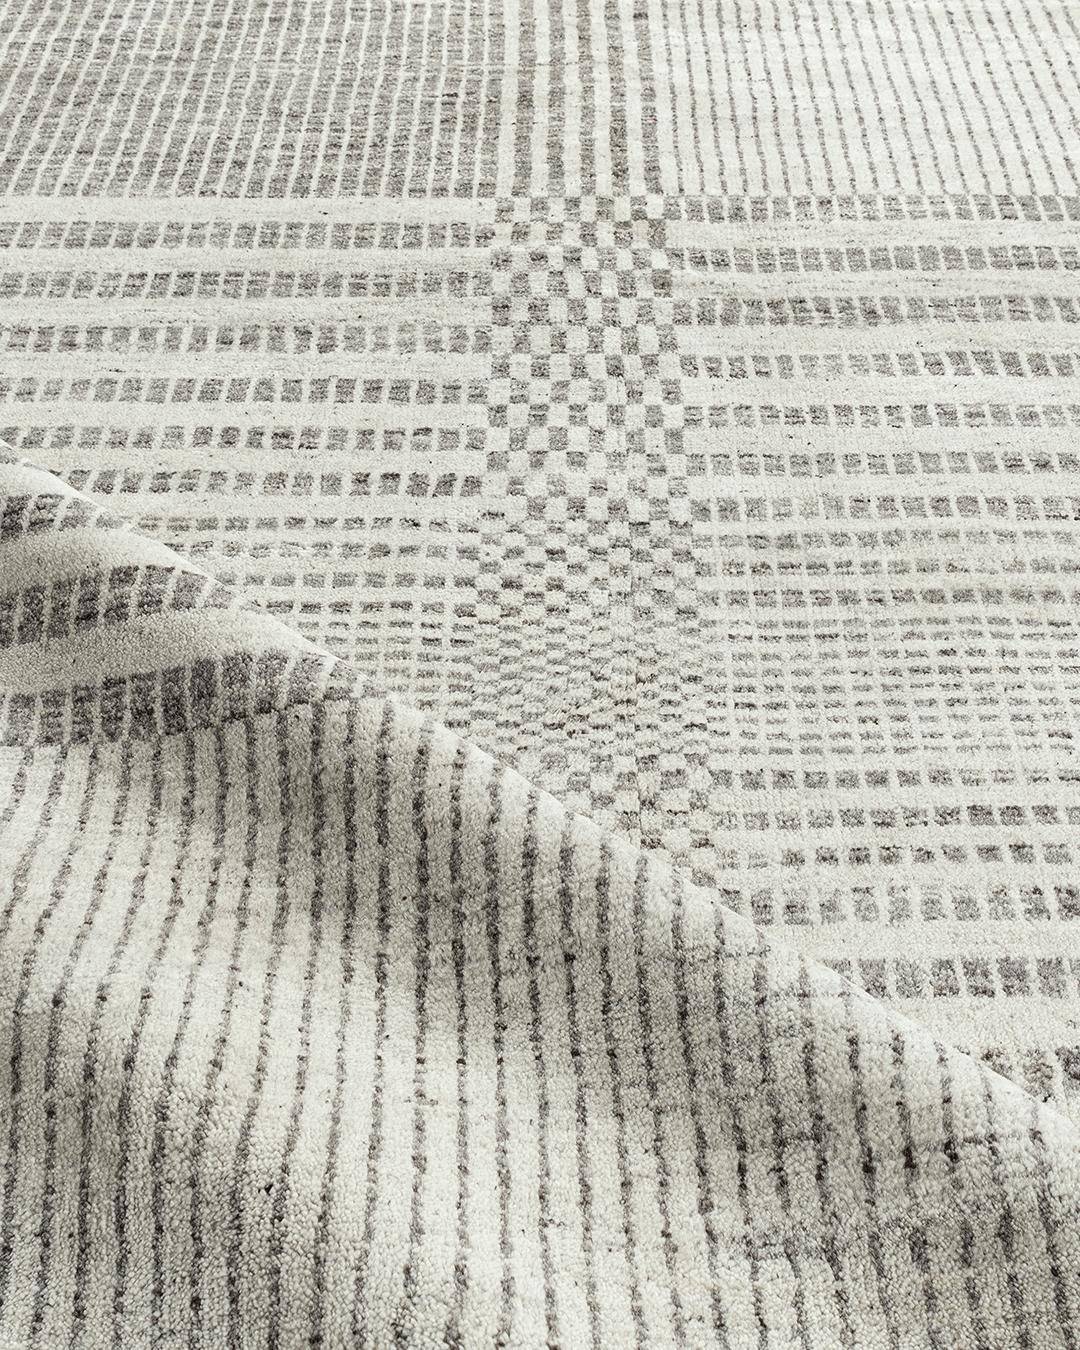 Organic checker contemporary gray area rug 9' x 11'10. We call this our Organic Line because from sheep to rug, all the processes are organic and natural. The sheep are hand sheared and the wool is separated initially by color into beiges, creams,